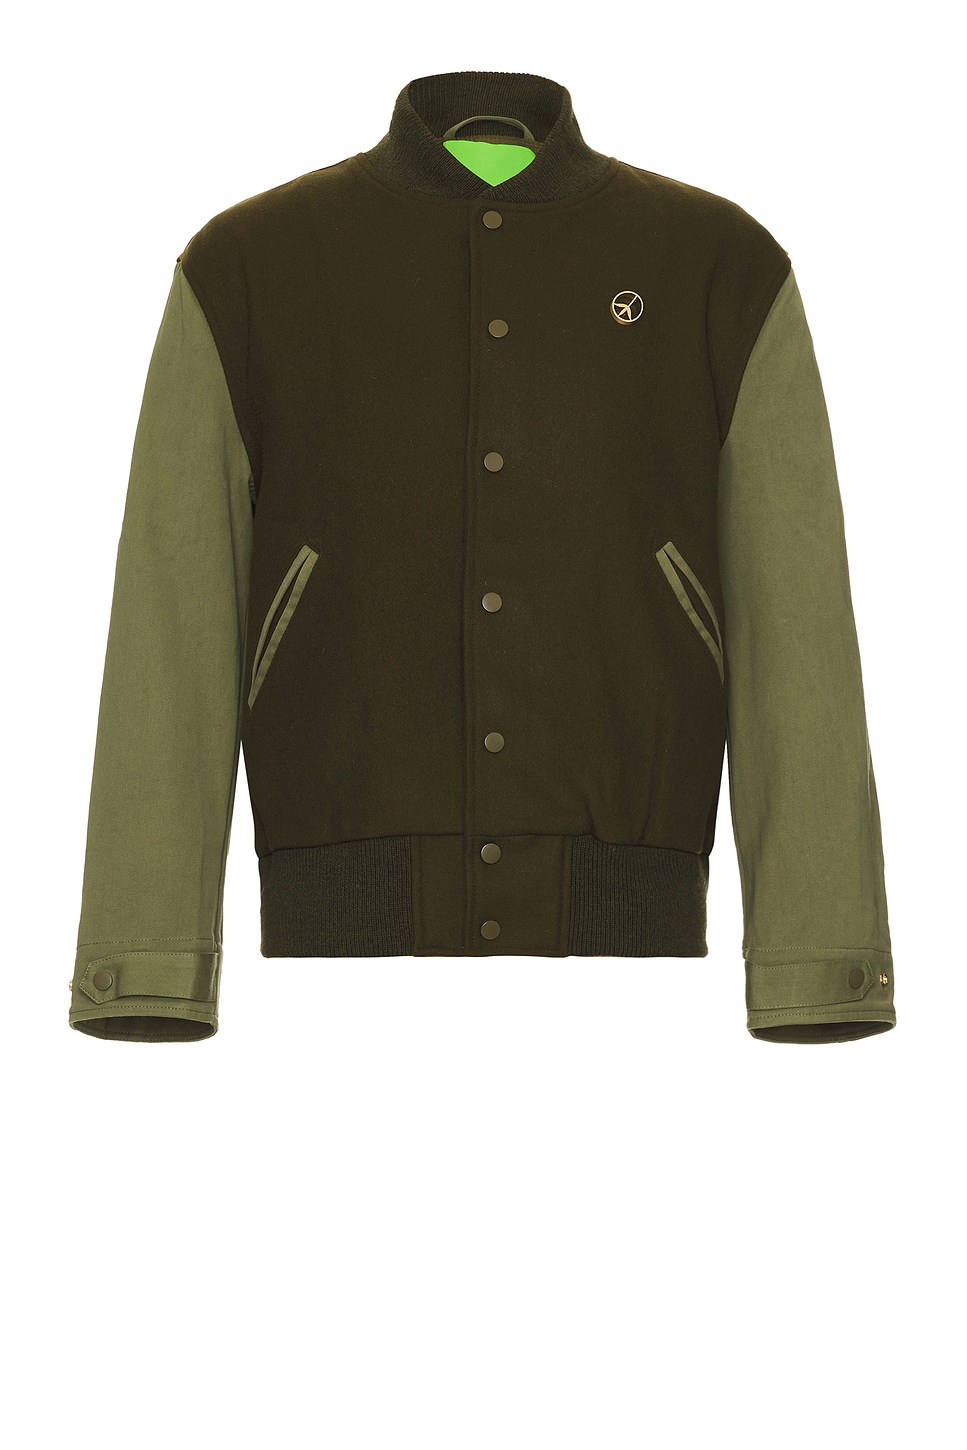 Image 1 of Mister Green M-65 Varsity Jacket in Earth & Olive